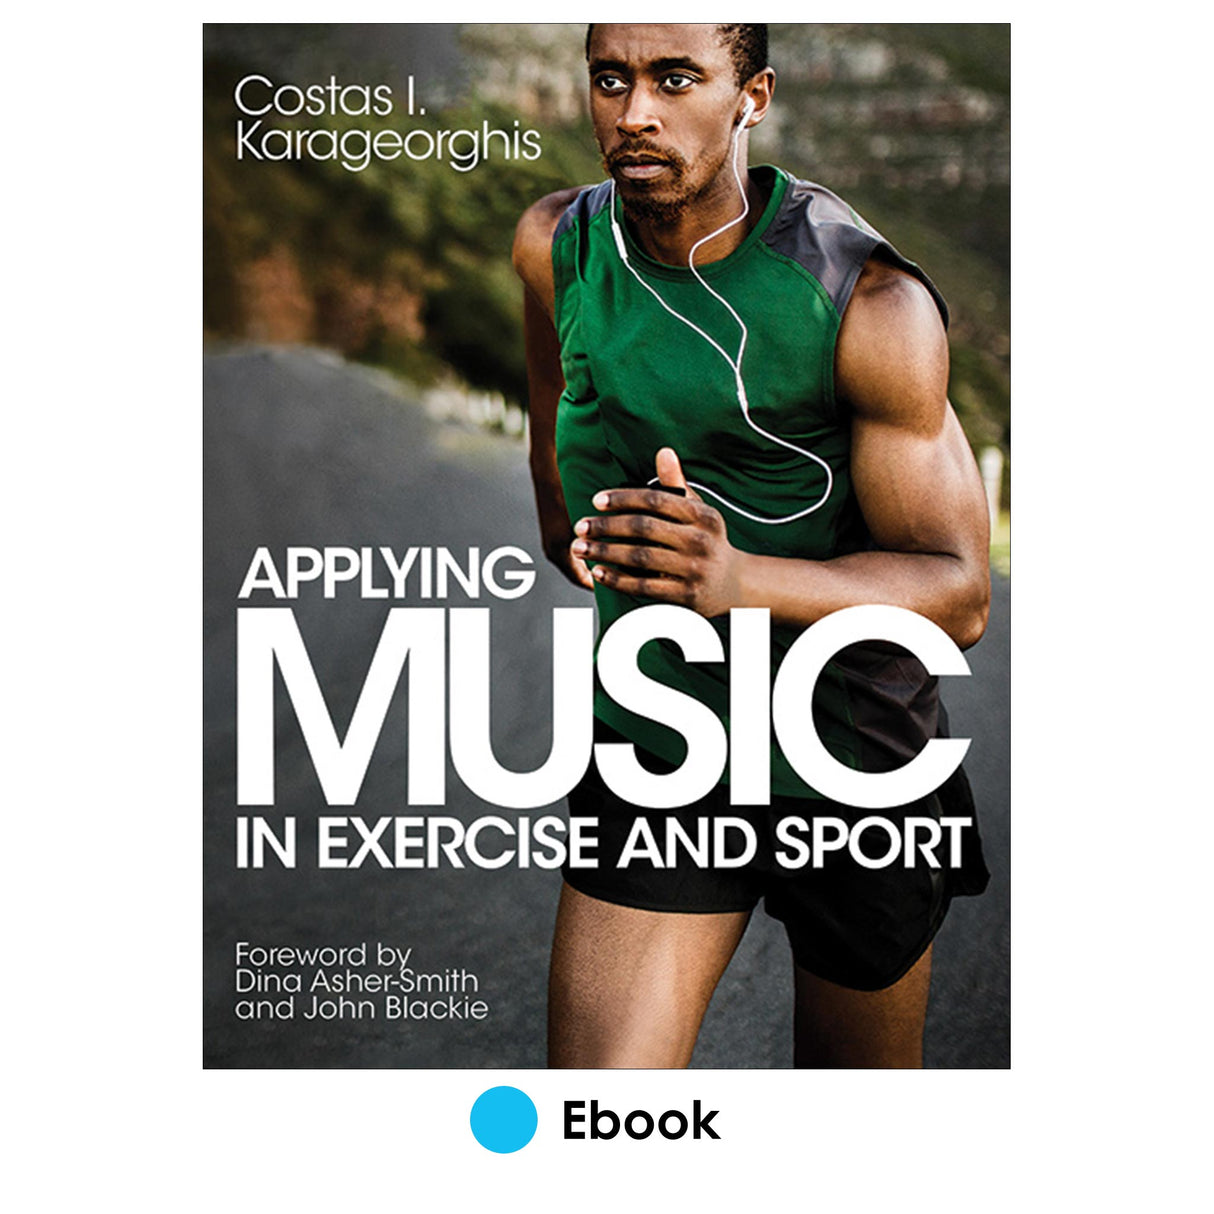 Applying Music in Exercise and Sport PDF